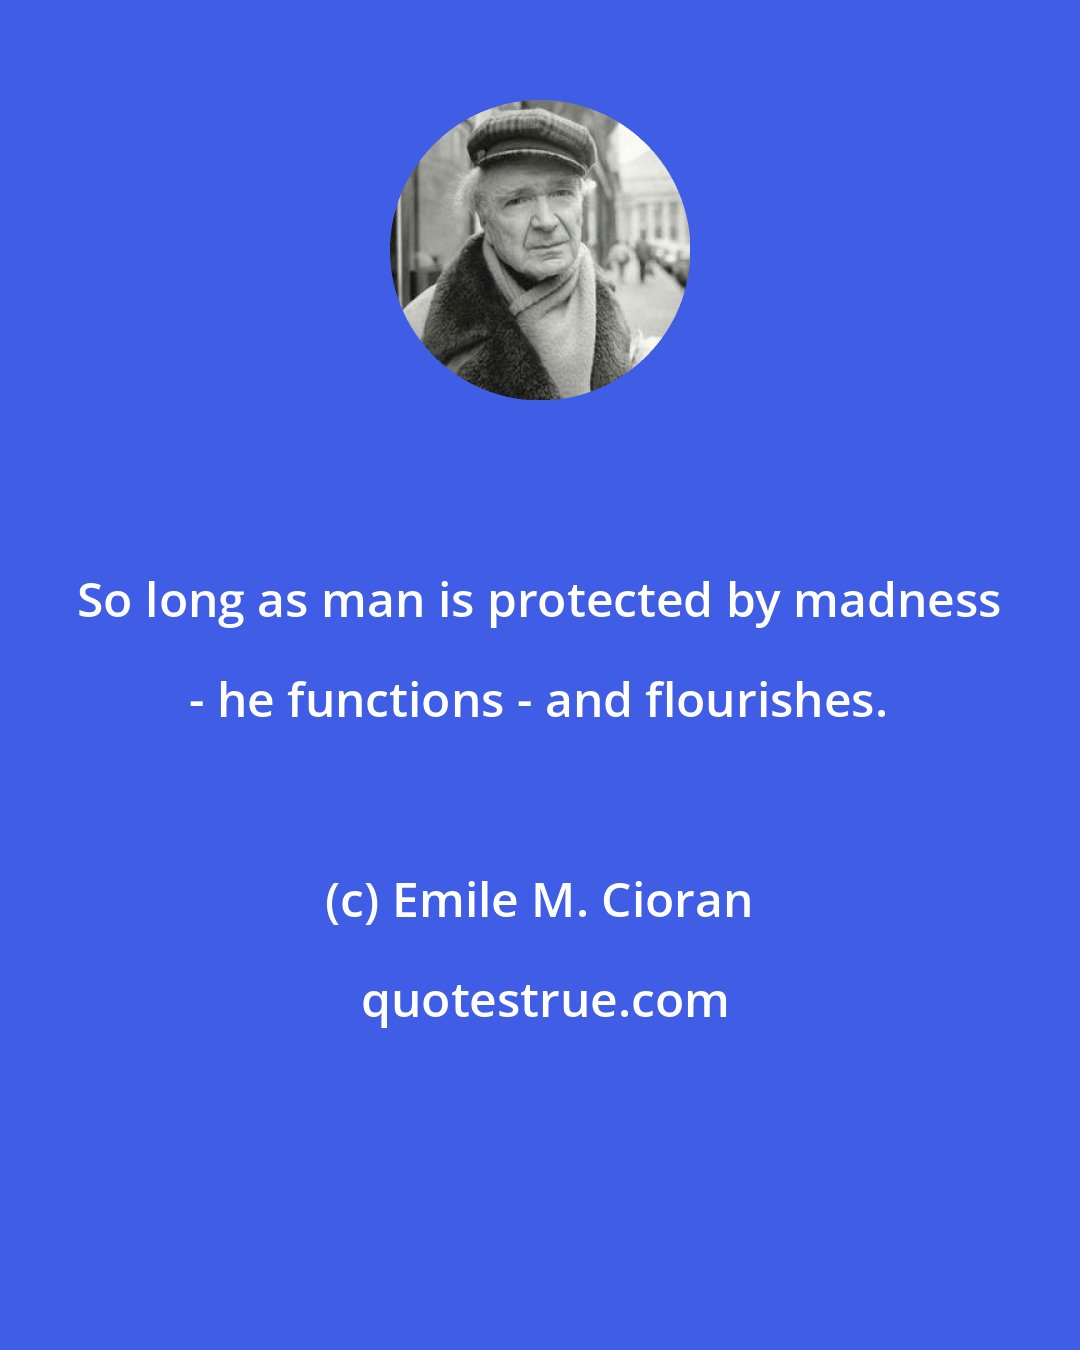 Emile M. Cioran: So long as man is protected by madness - he functions - and flourishes.